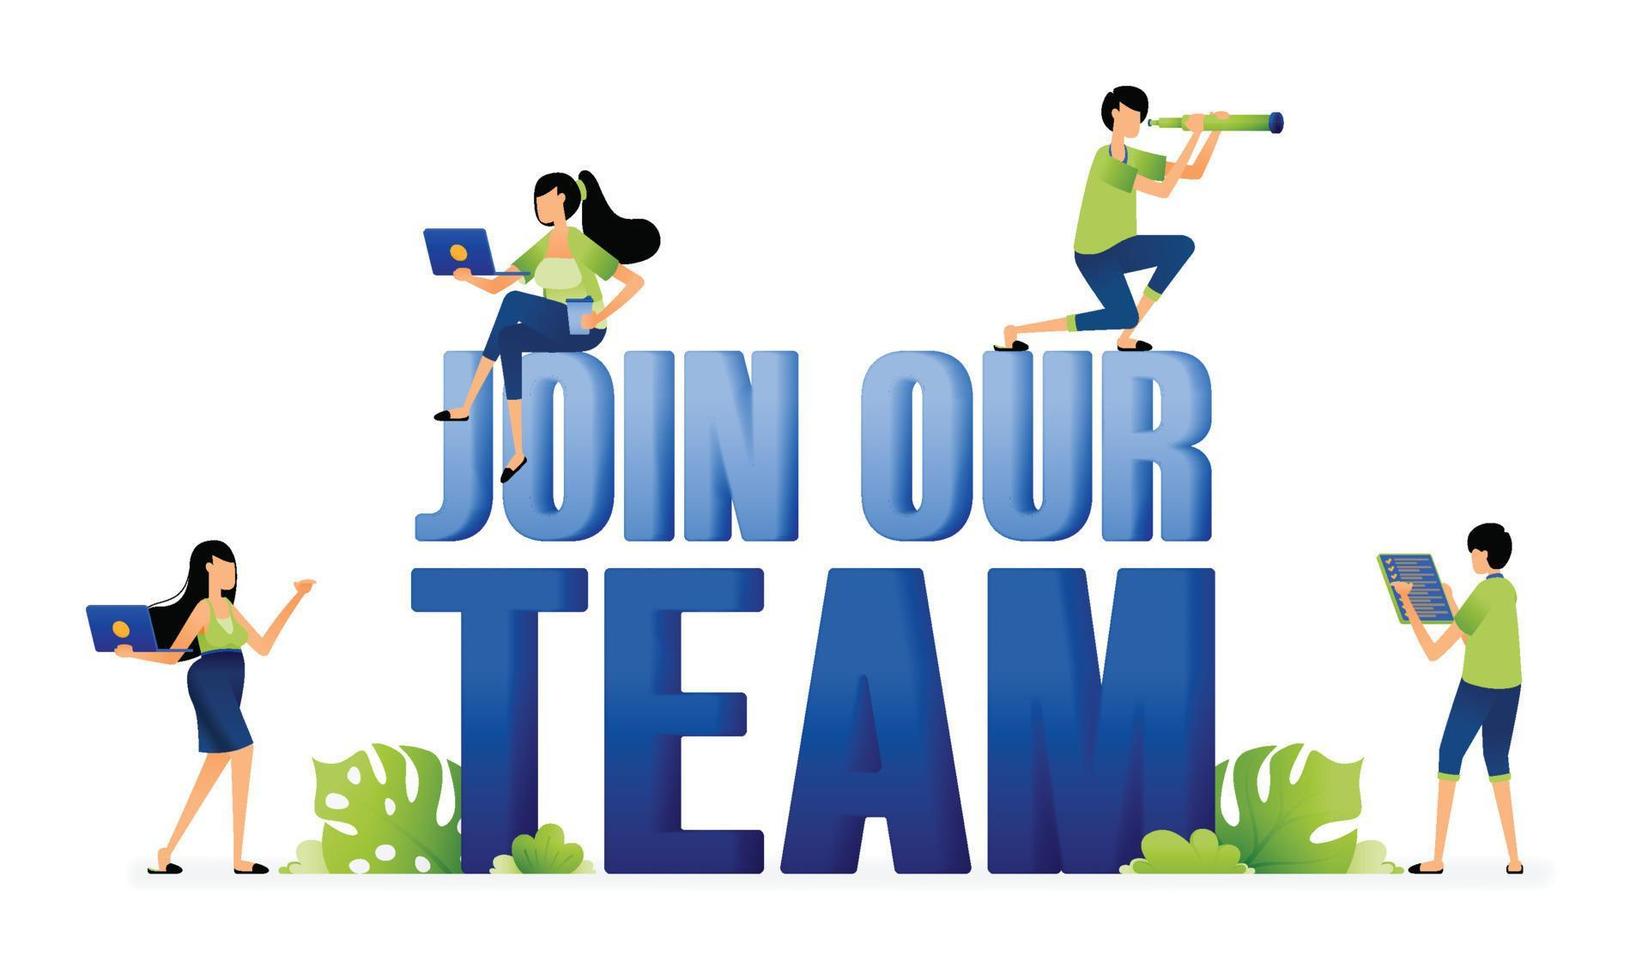 Illustration of join our team campaign vacancies. Company announcements in search of best employee candidates. Designed for website, landing page, flyer, banner, apps, brochure, startup media company vector